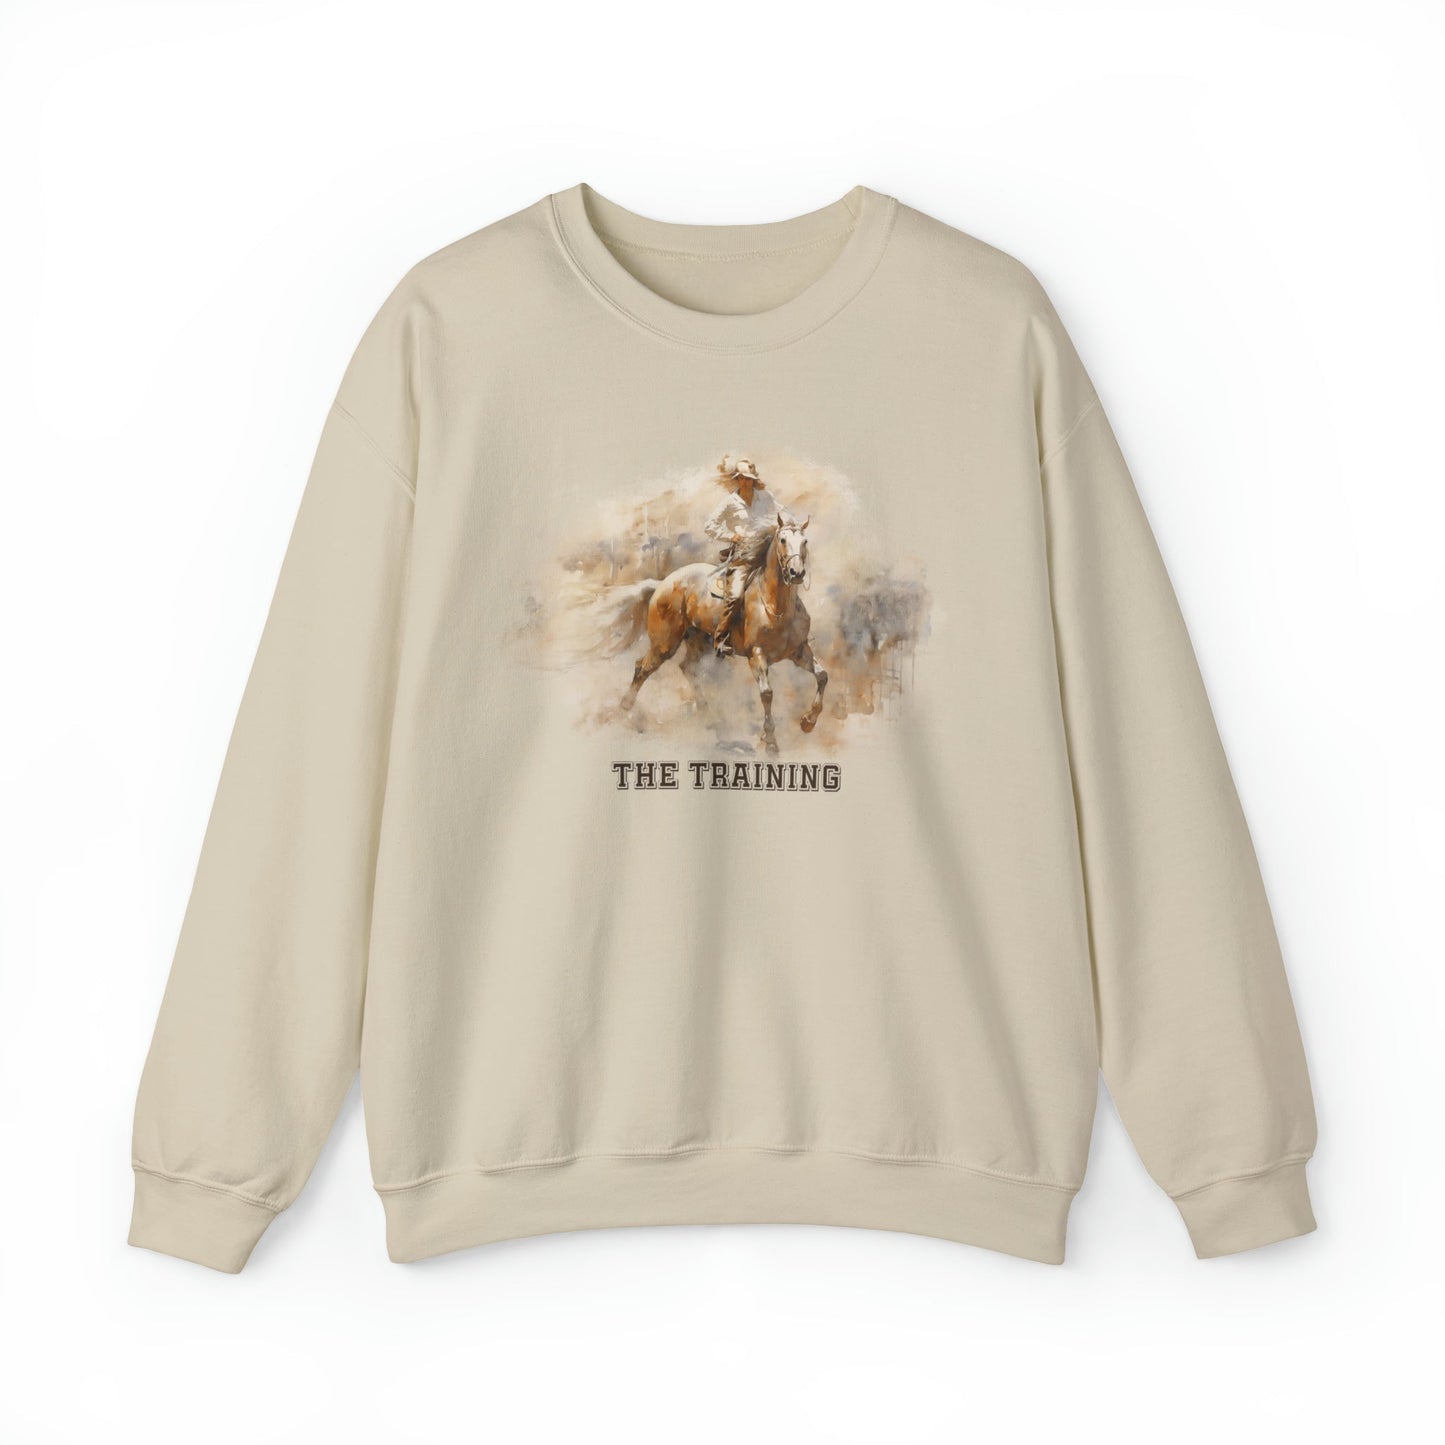 Horse Trainer Sweatshirt - "The Training" Sweater, A Horse and Rider Learning Trust - FlooredByArt